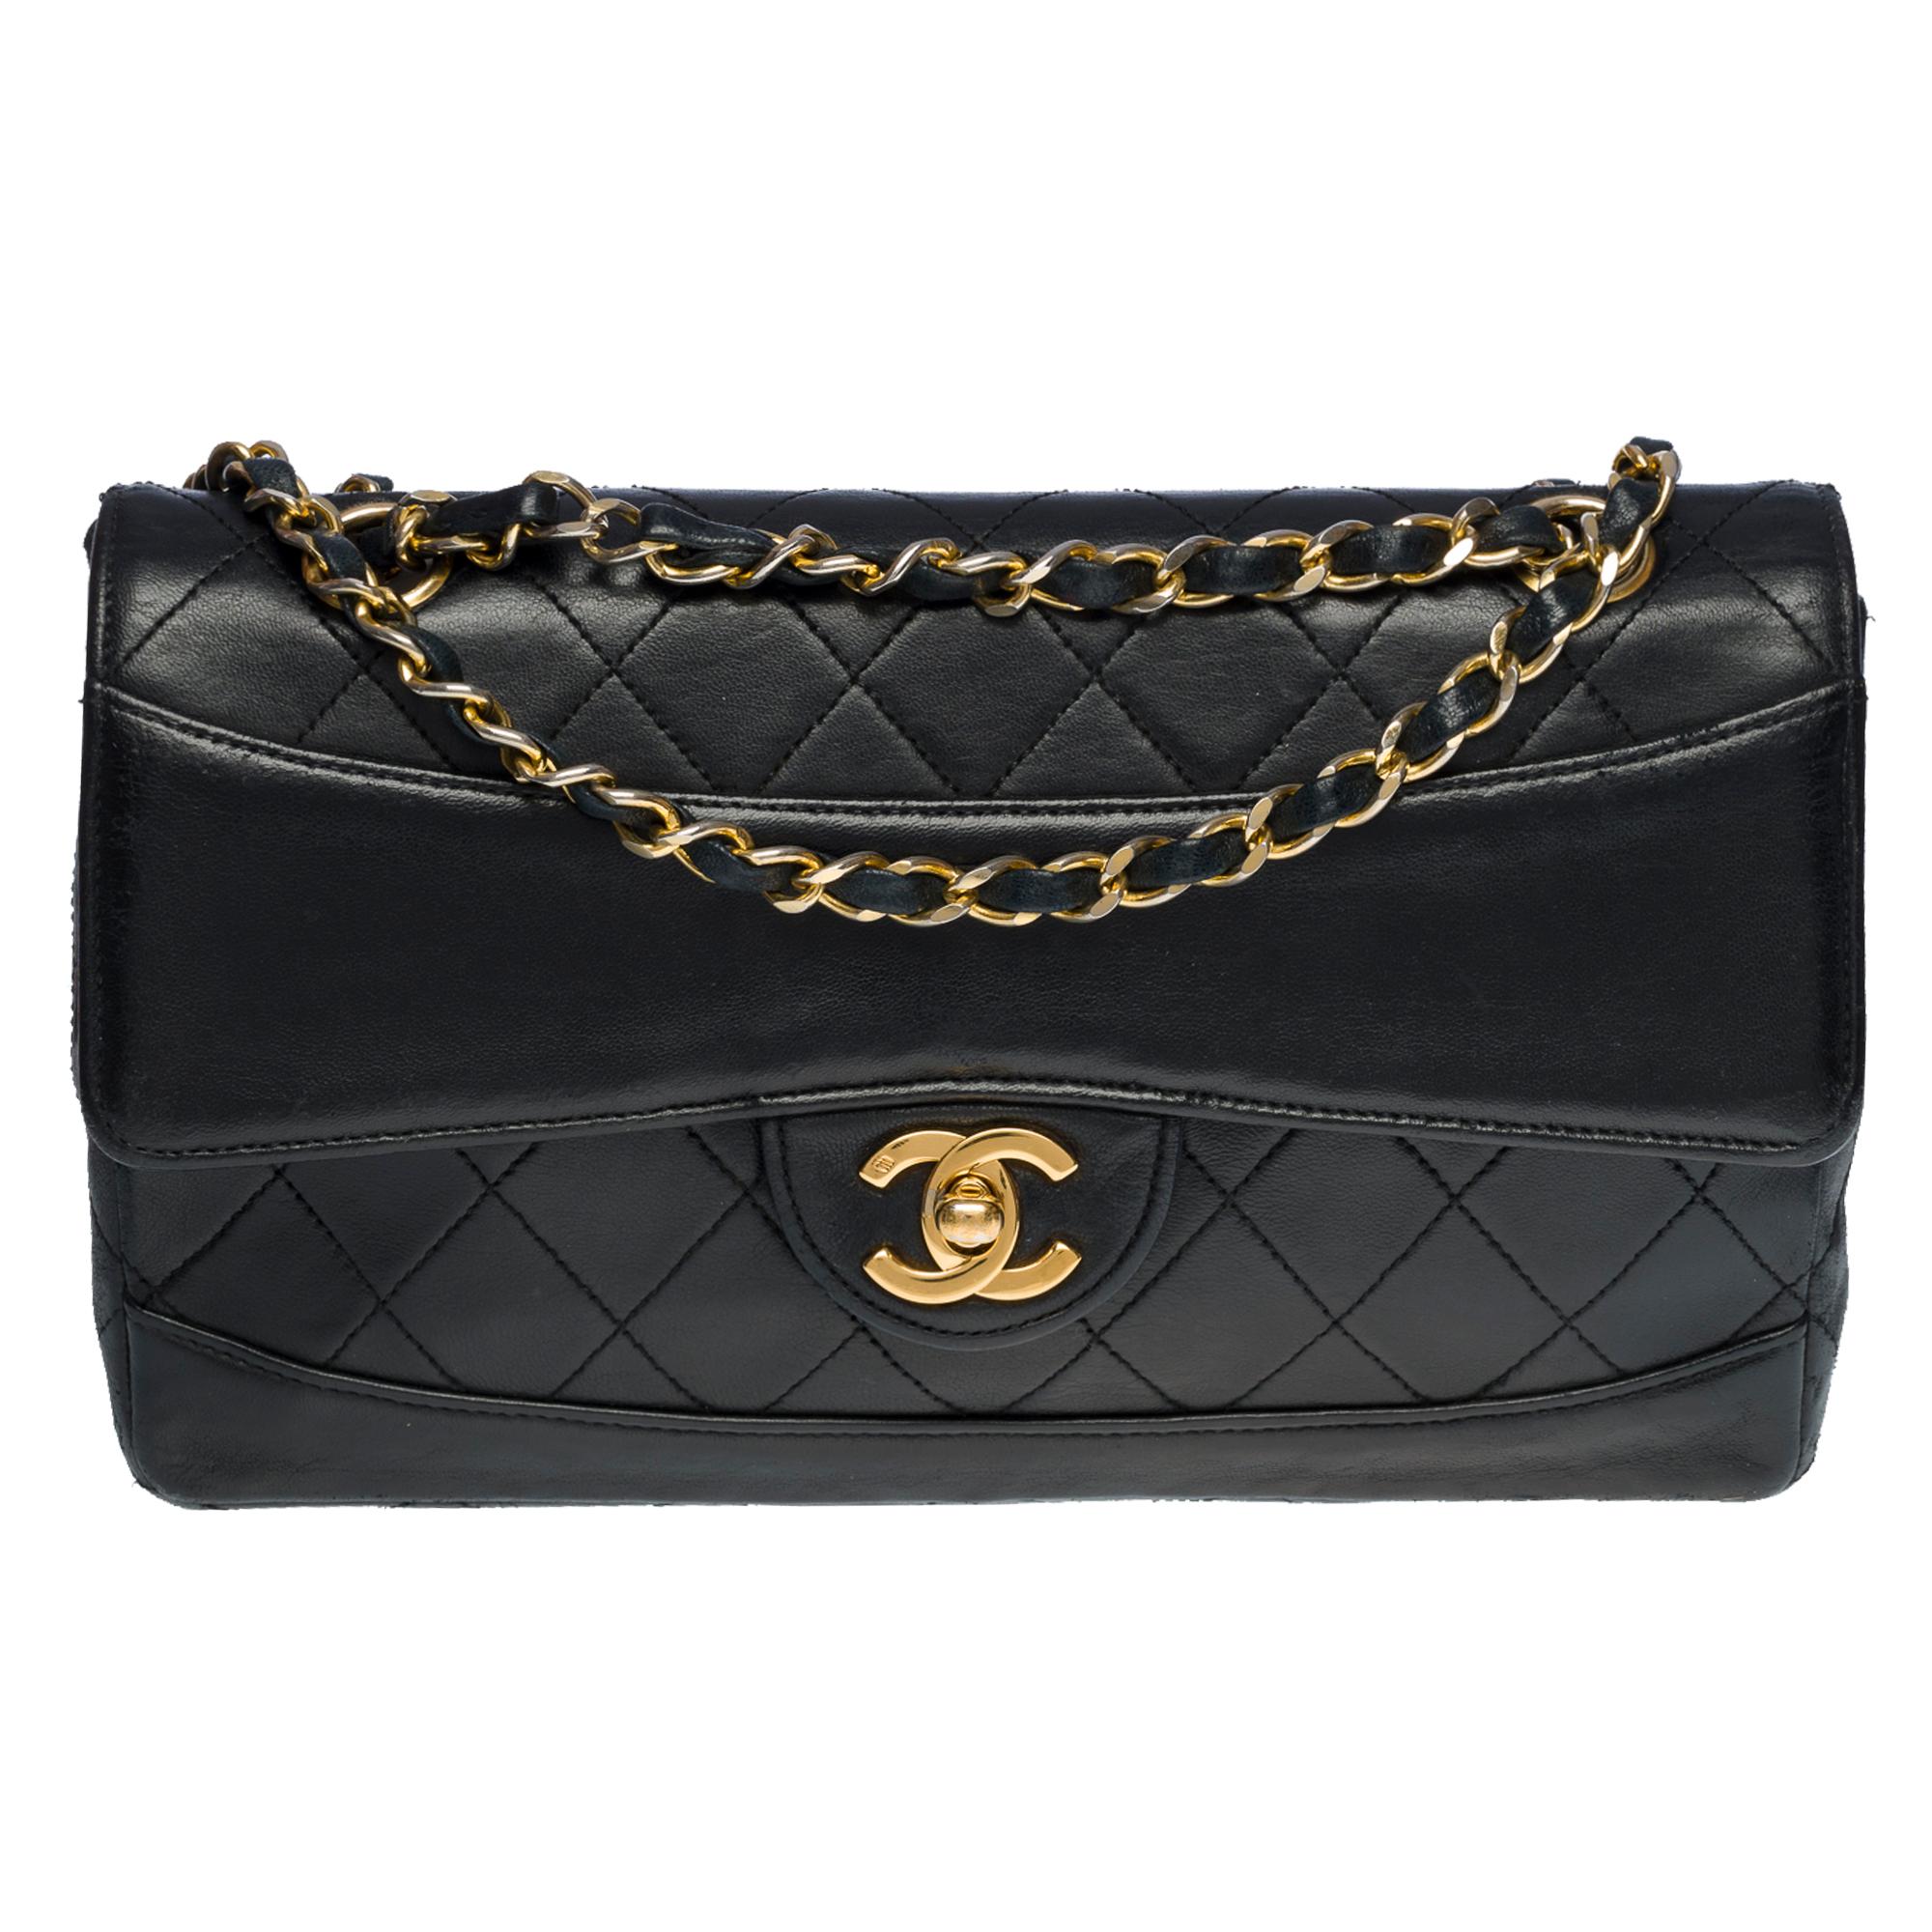 Beautiful Chanel Timeless/Classic 23cm Flap bag in black partially quilted lamb leather, gold-plated metal hardware, a gold-plated metal chain handle interwoven with black leather for a shoulder and shoulder strap, a detachable black quilted leather